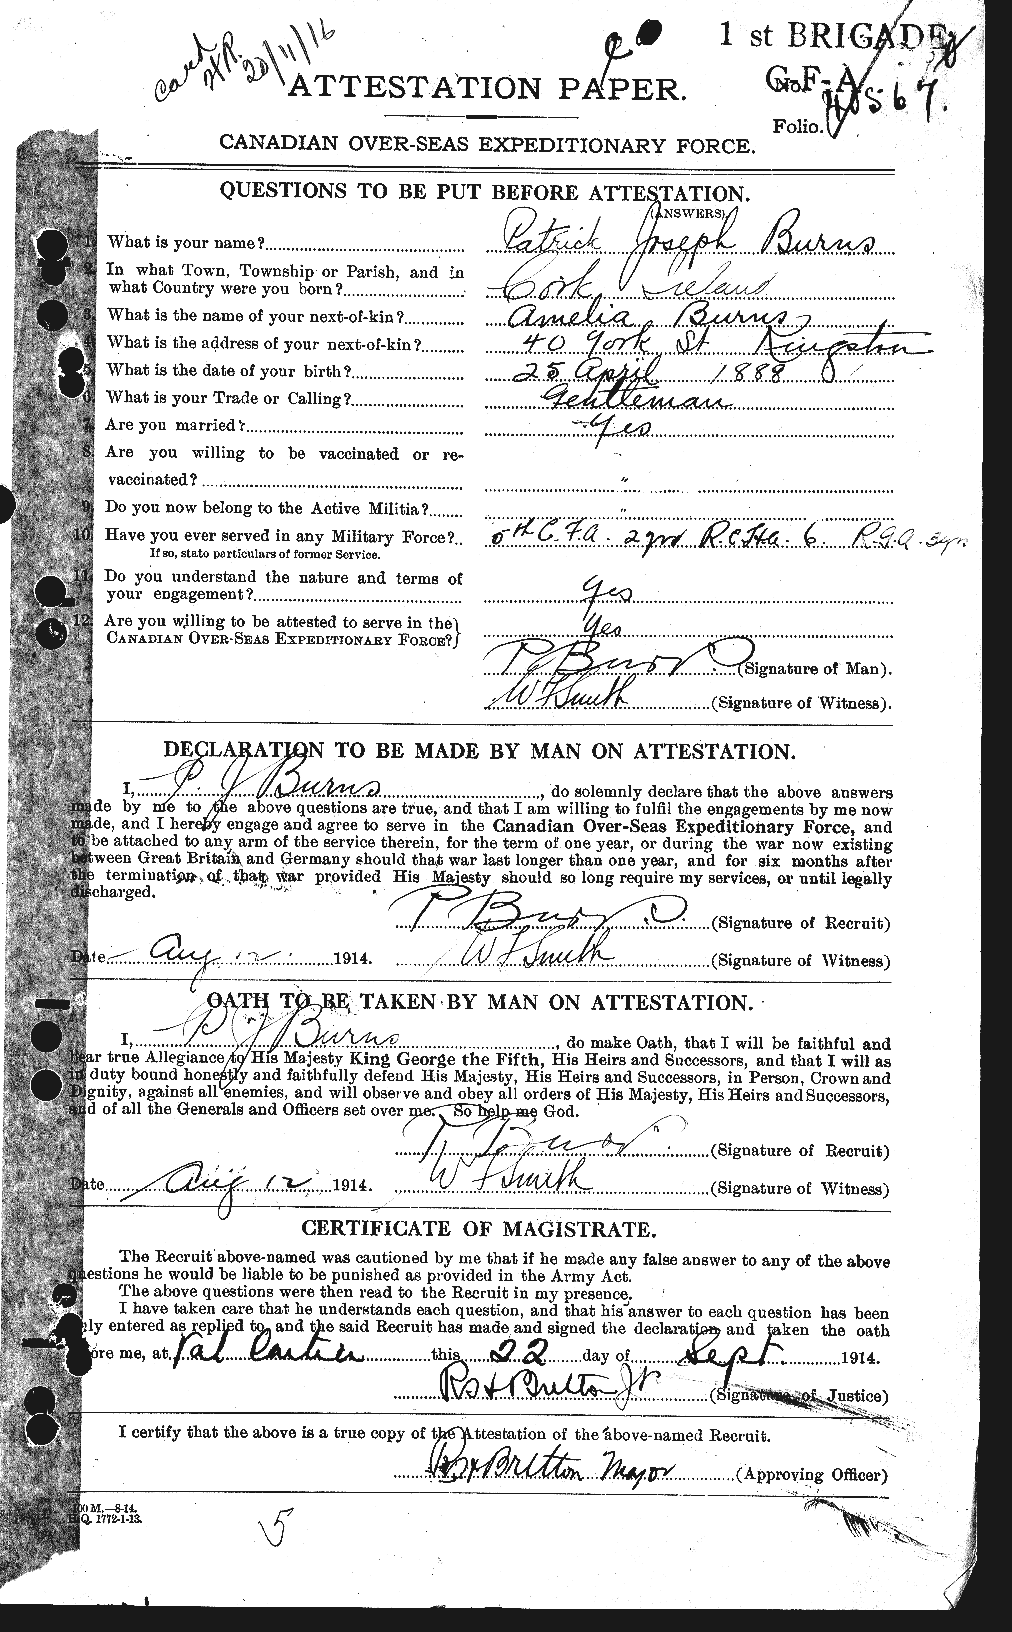 Personnel Records of the First World War - CEF 271678a